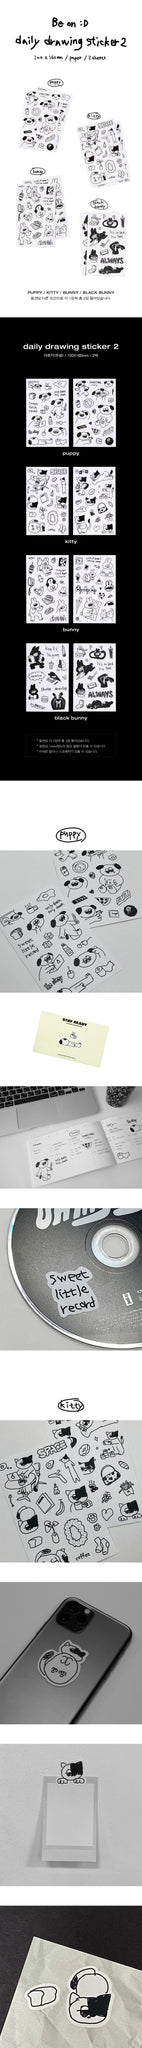 Be On :D Daily Drawing Sticker Ver.2